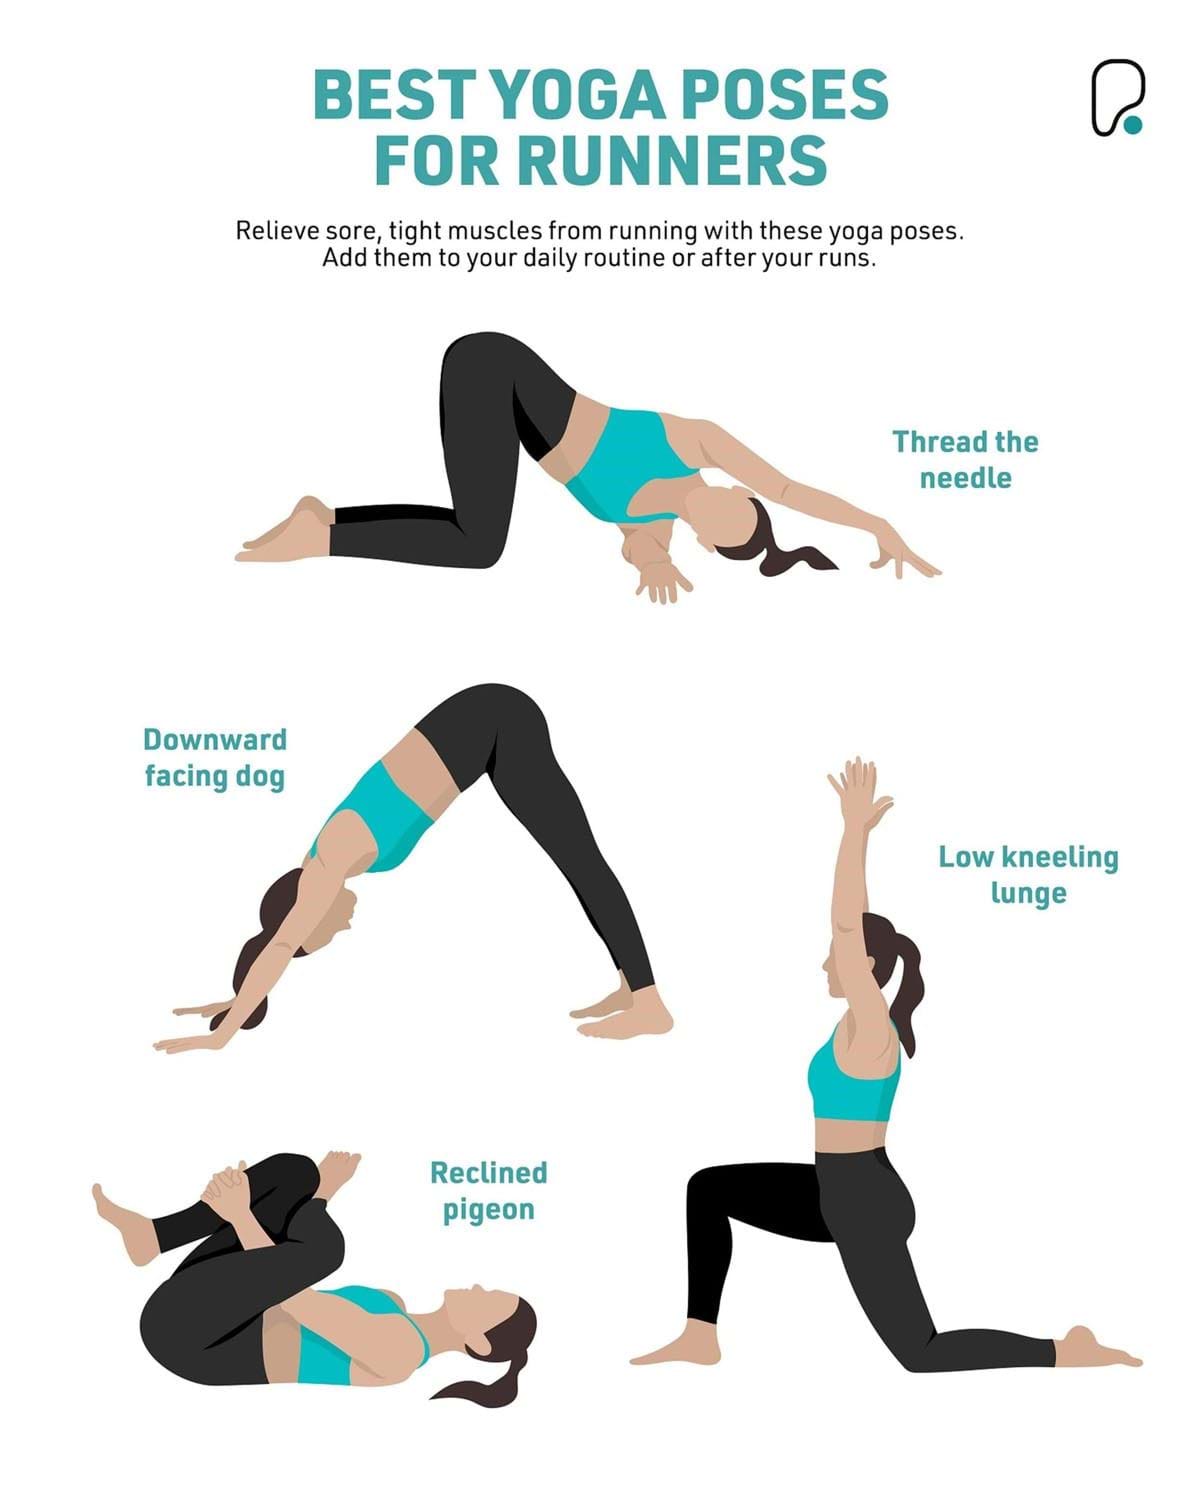 Best yoga poses for runners